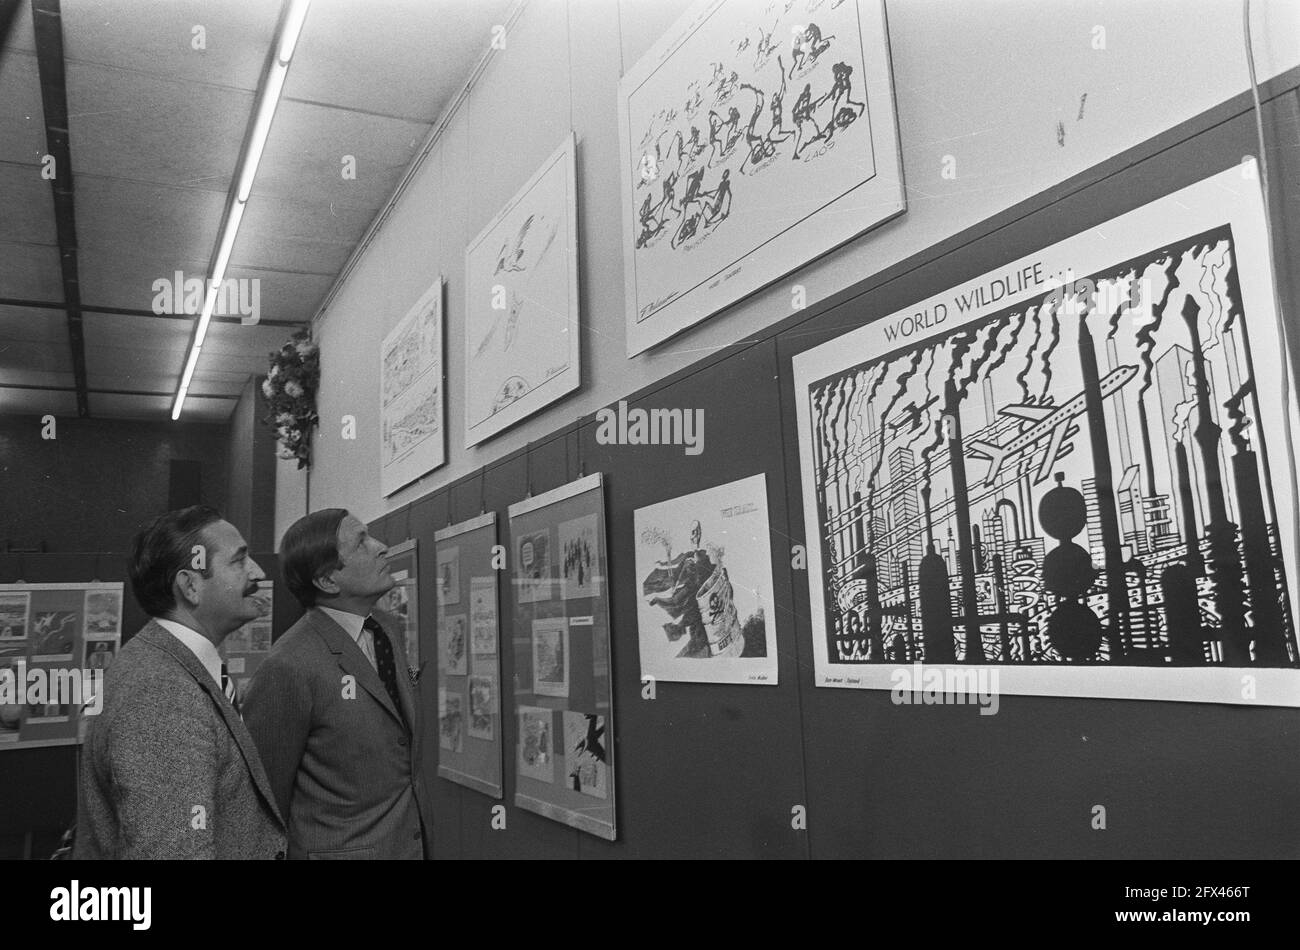 The prince and cartoonist Fritz Behrendt view cartoons, November 9, 1973, cartoonists, cartoons, openings, princes, exhibitions, The Netherlands, 20th century press agency photo, news to remember, documentary, historic photography 1945-1990, visual stories, human history of the Twentieth Century, capturing moments in time Stock Photo